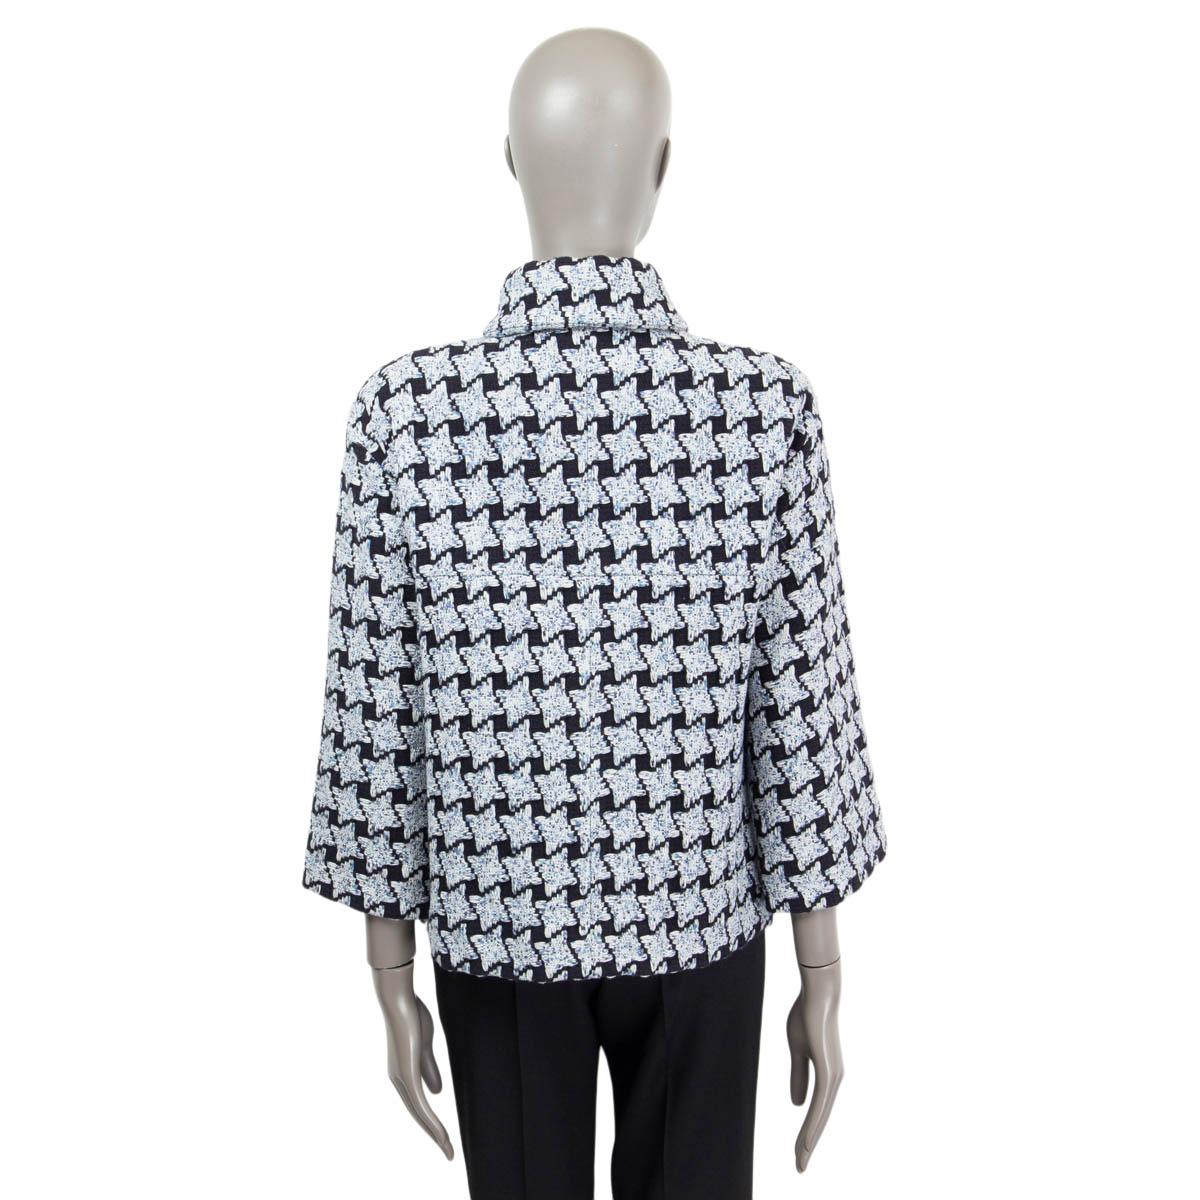 Gray CHANEL light & navy blue cotton 2019 19B HOUNDSTOOTH TWEED Jacket 38 S